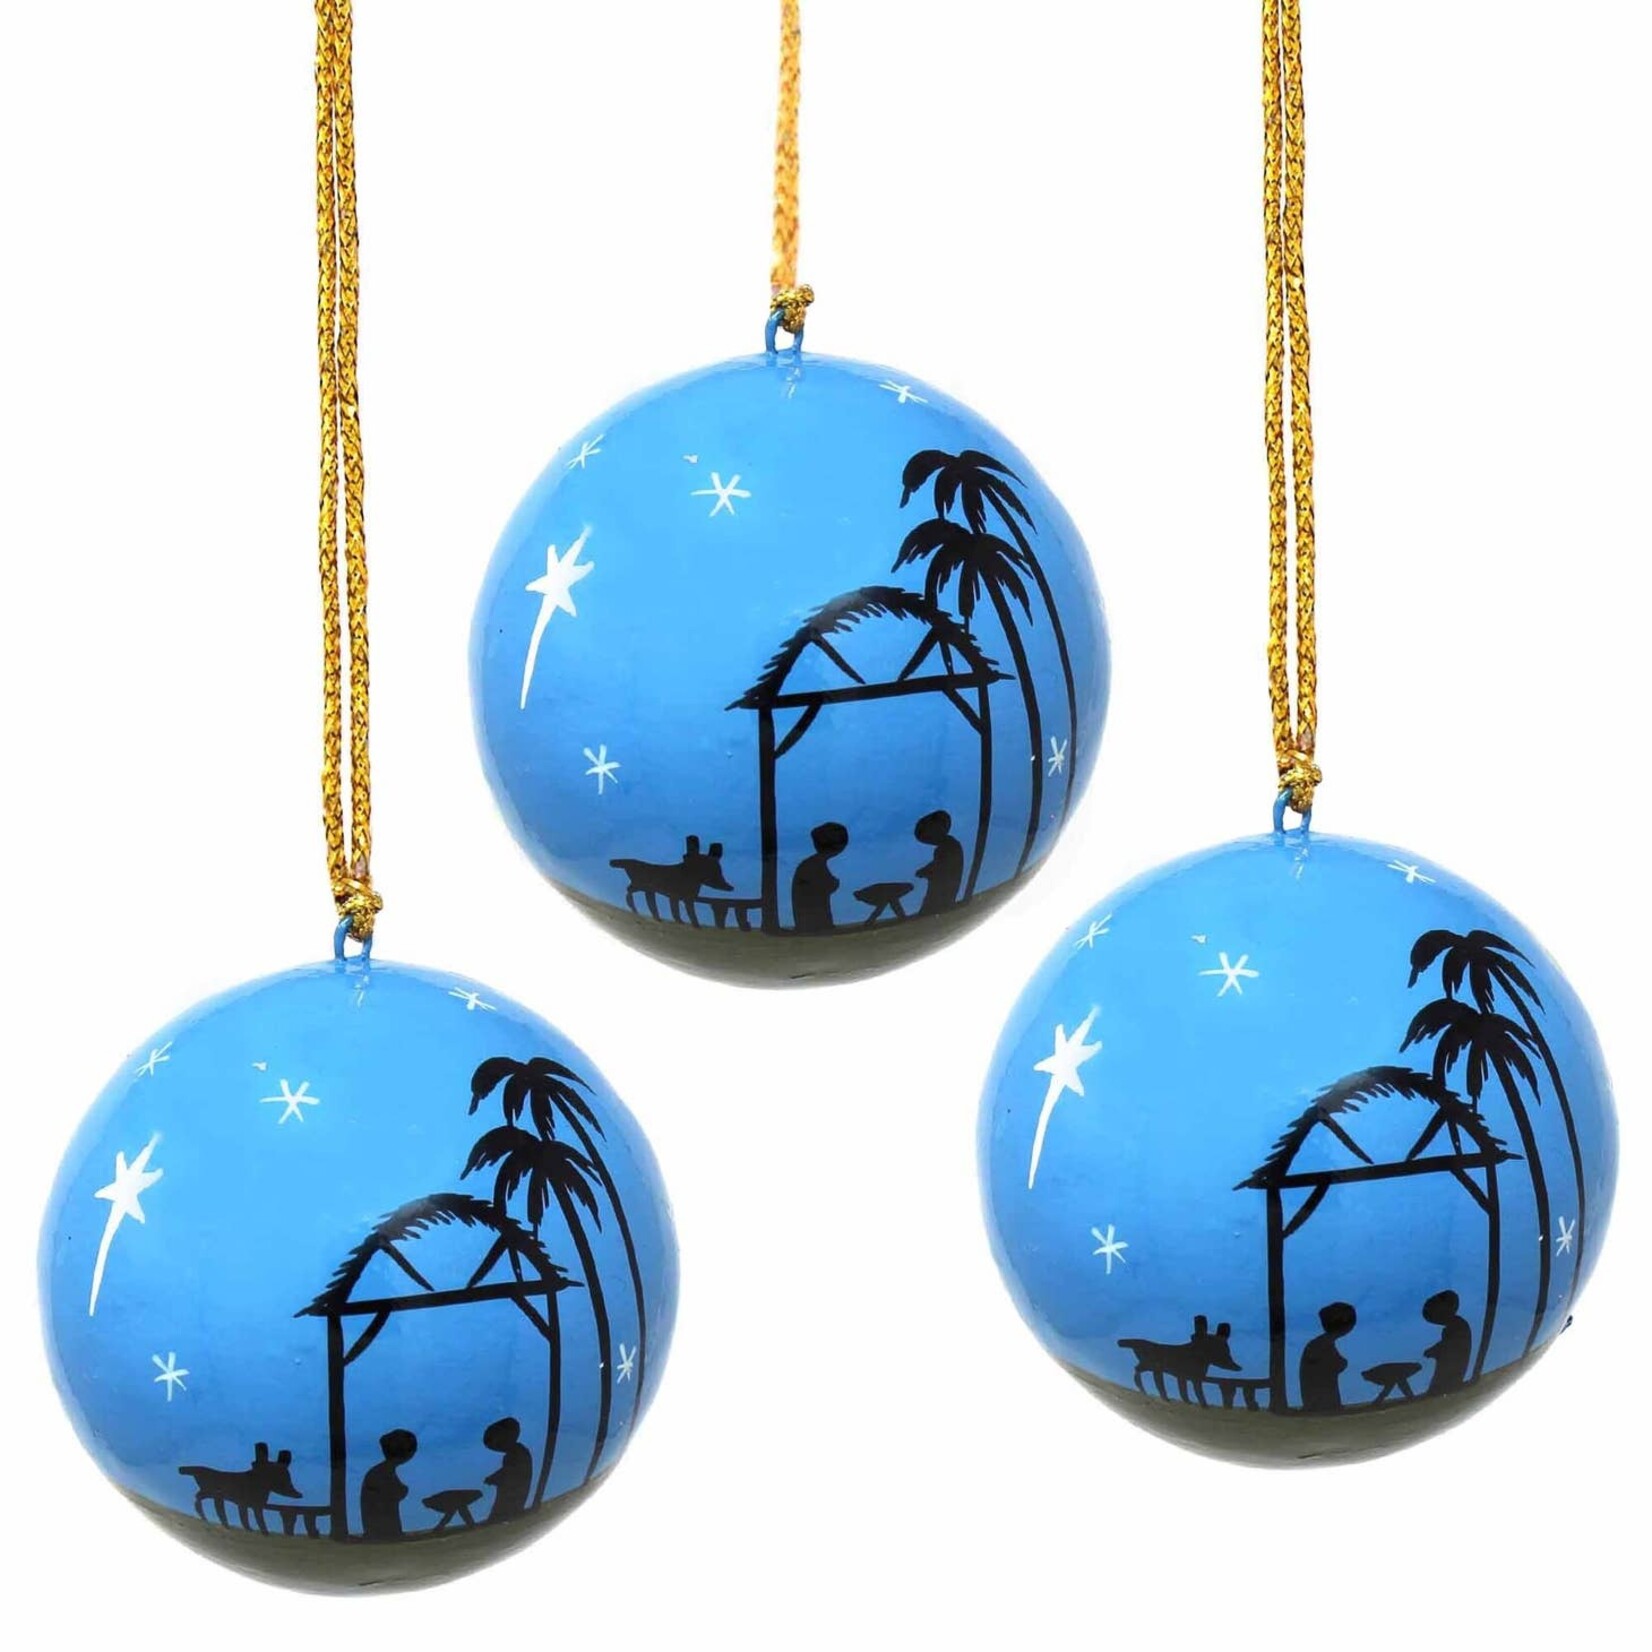 Global Crafts Handpainted Nativity Ball Ornament, India